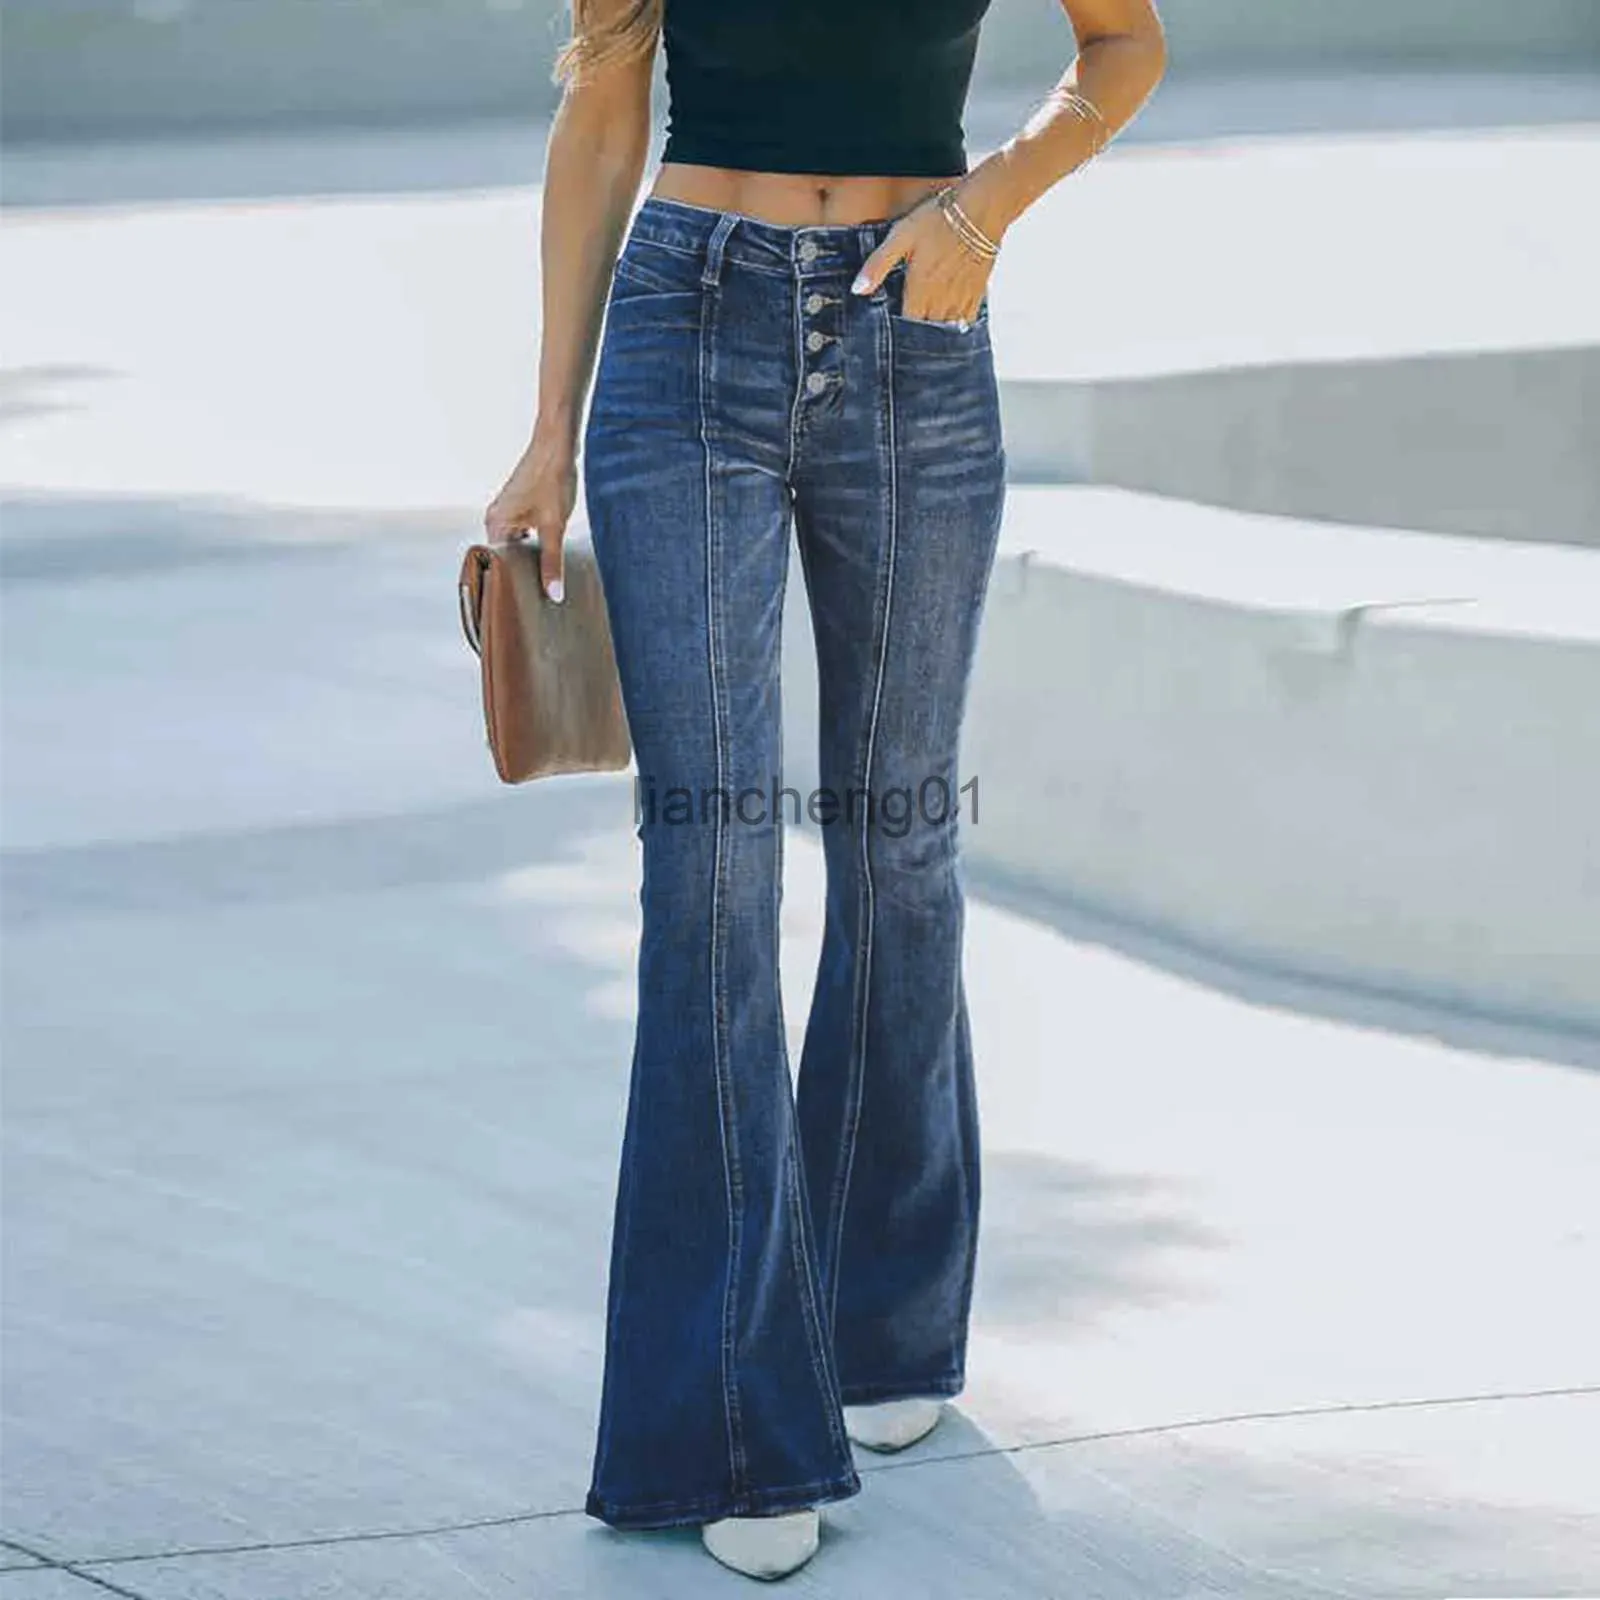 Vintage High Waist Flare High Waisted Flare Jeans With Wide Leg Split Hem  For Women Stretchy And Cute Retro Denim Sweatpants Style X0928 From  Liancheng01, $23.06